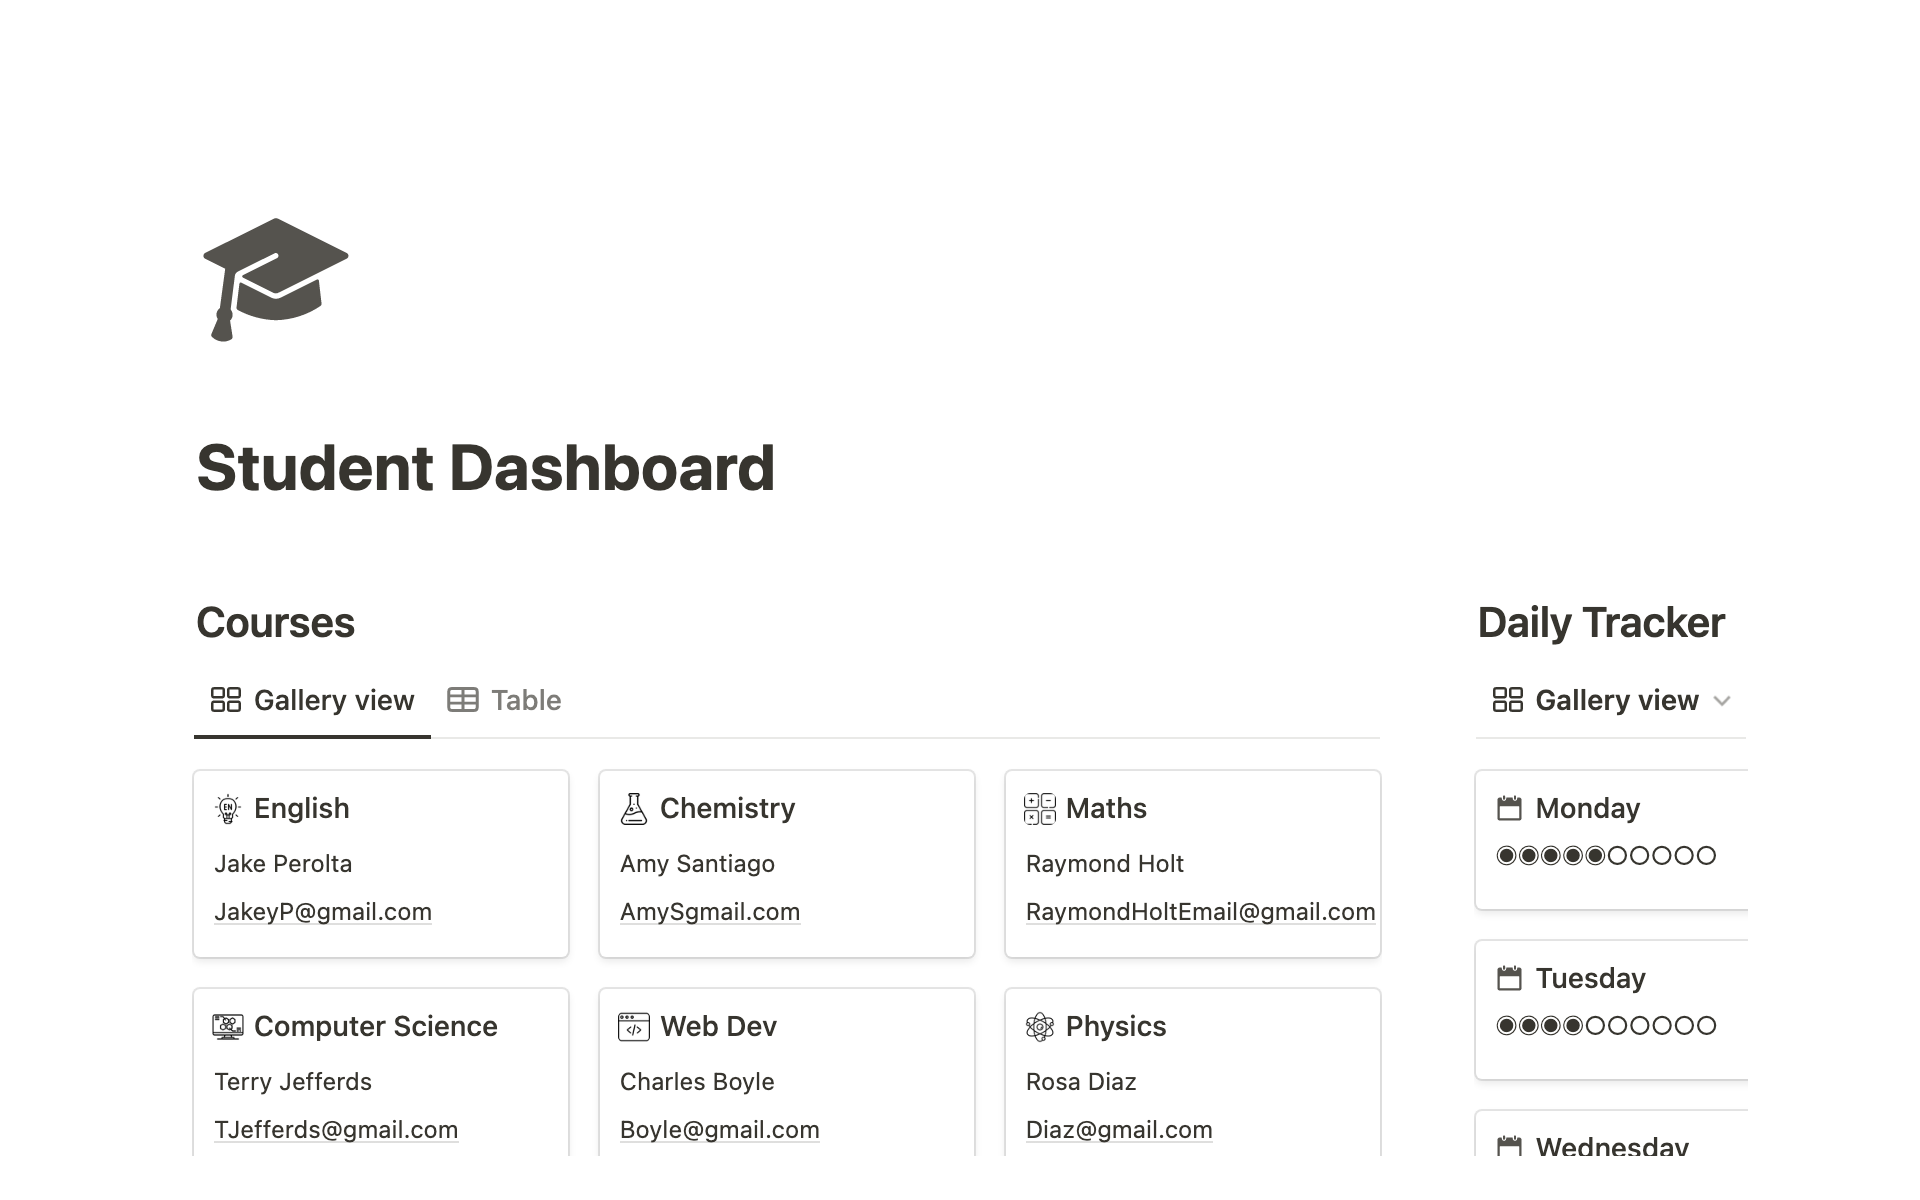 Student Dashboard allows you to stay organised, and have a visual overview of all areas of your courses.